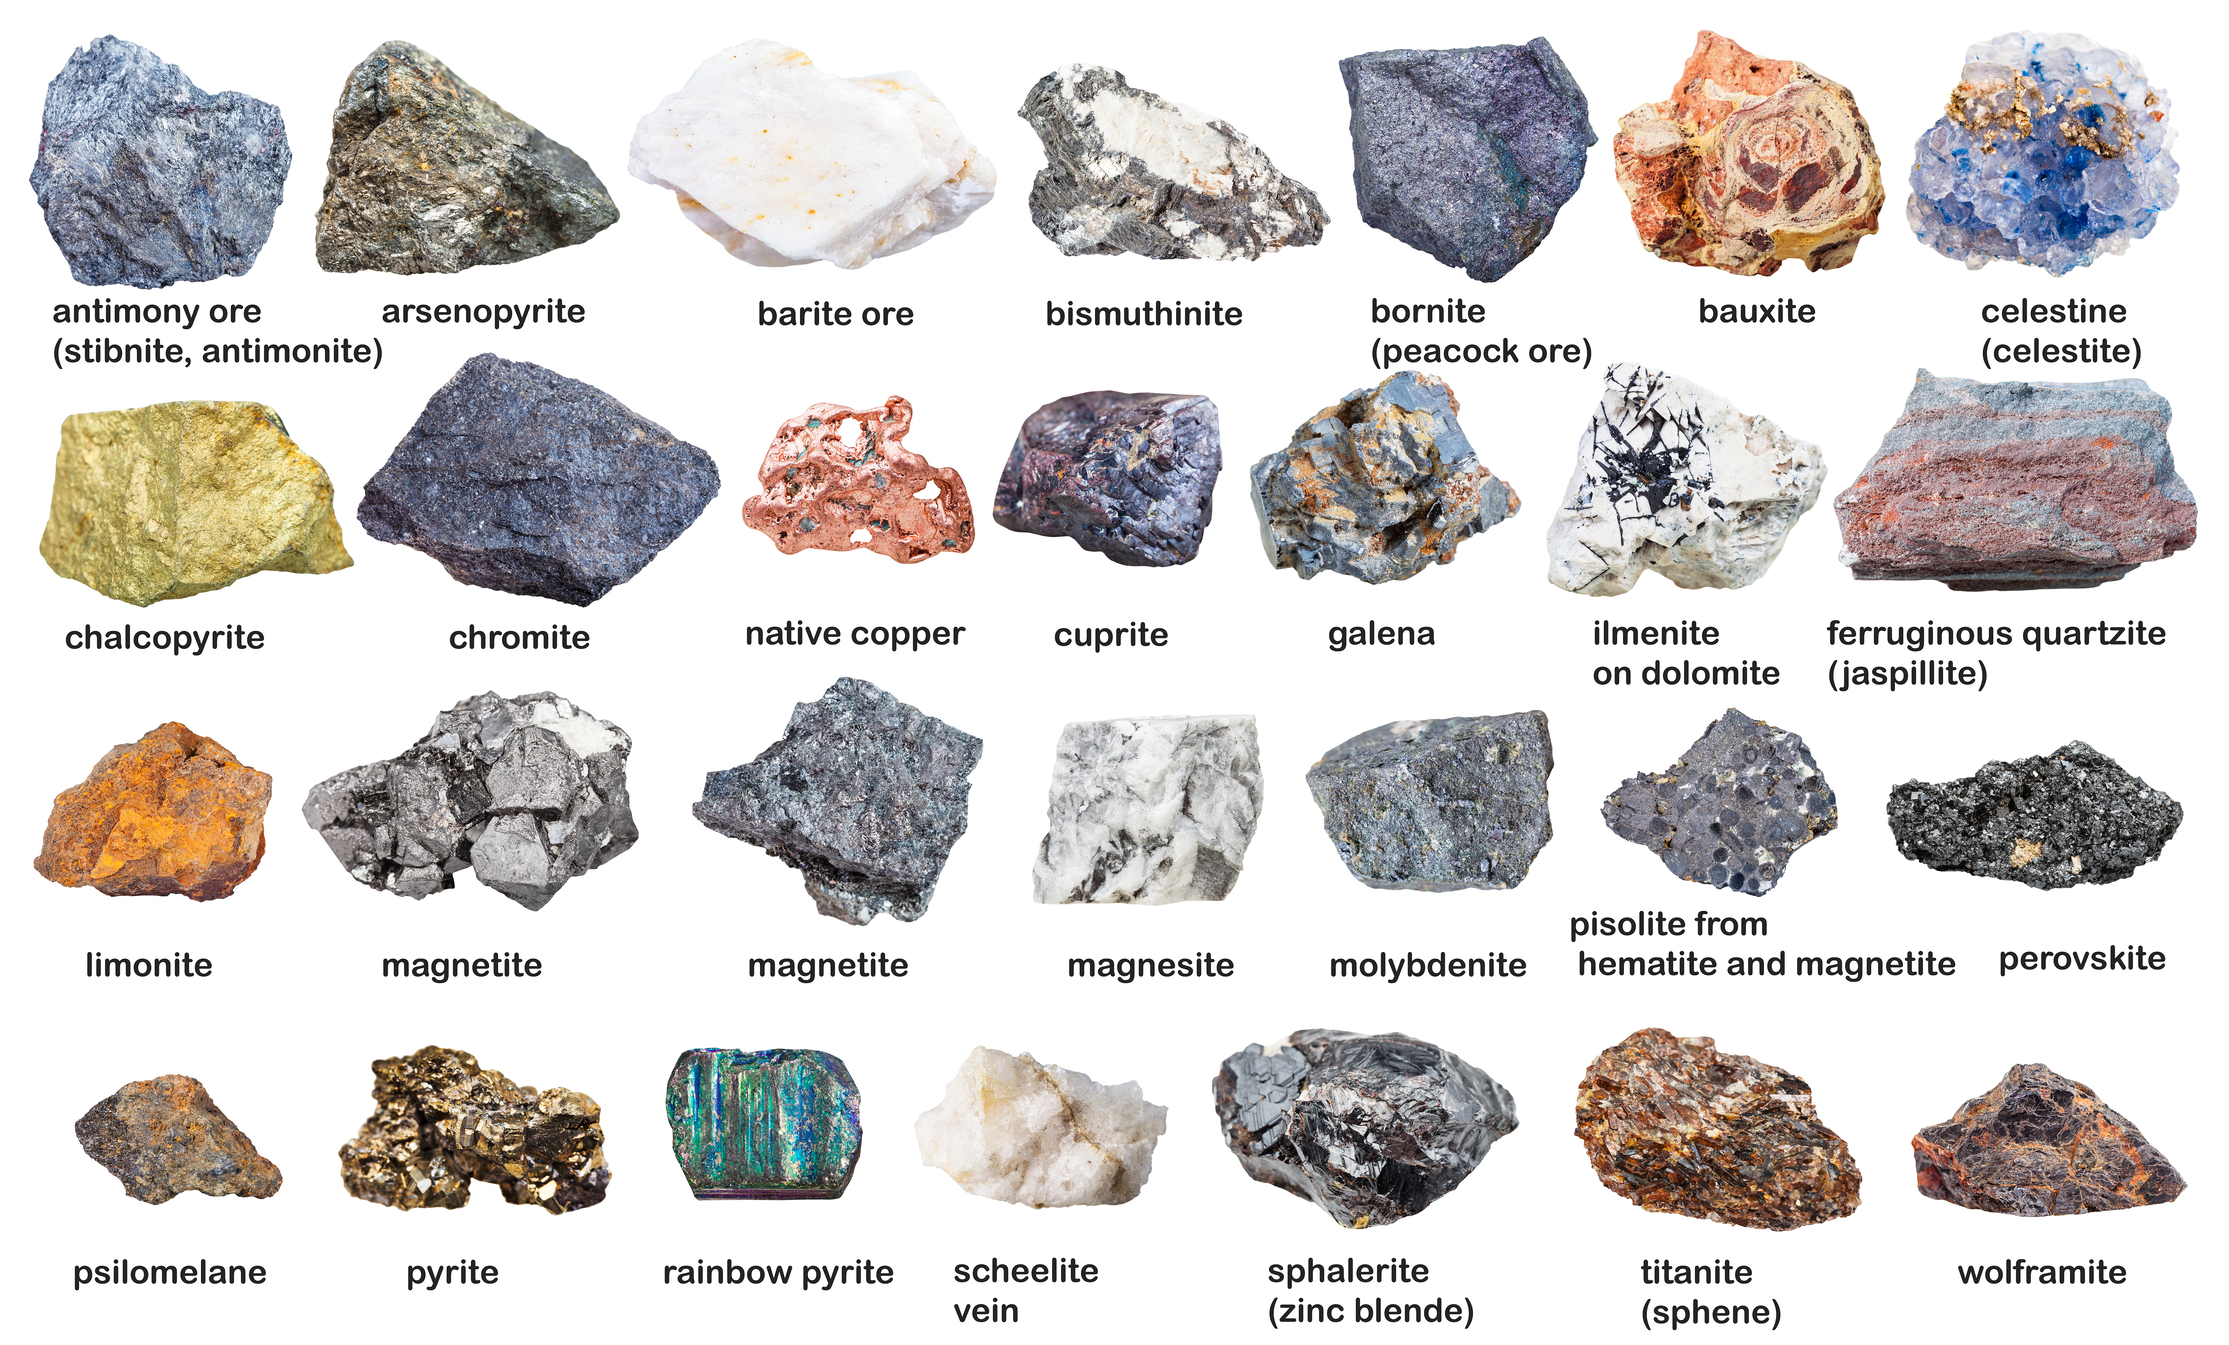 Some common minerals [Vvoevale | Dreamstime]